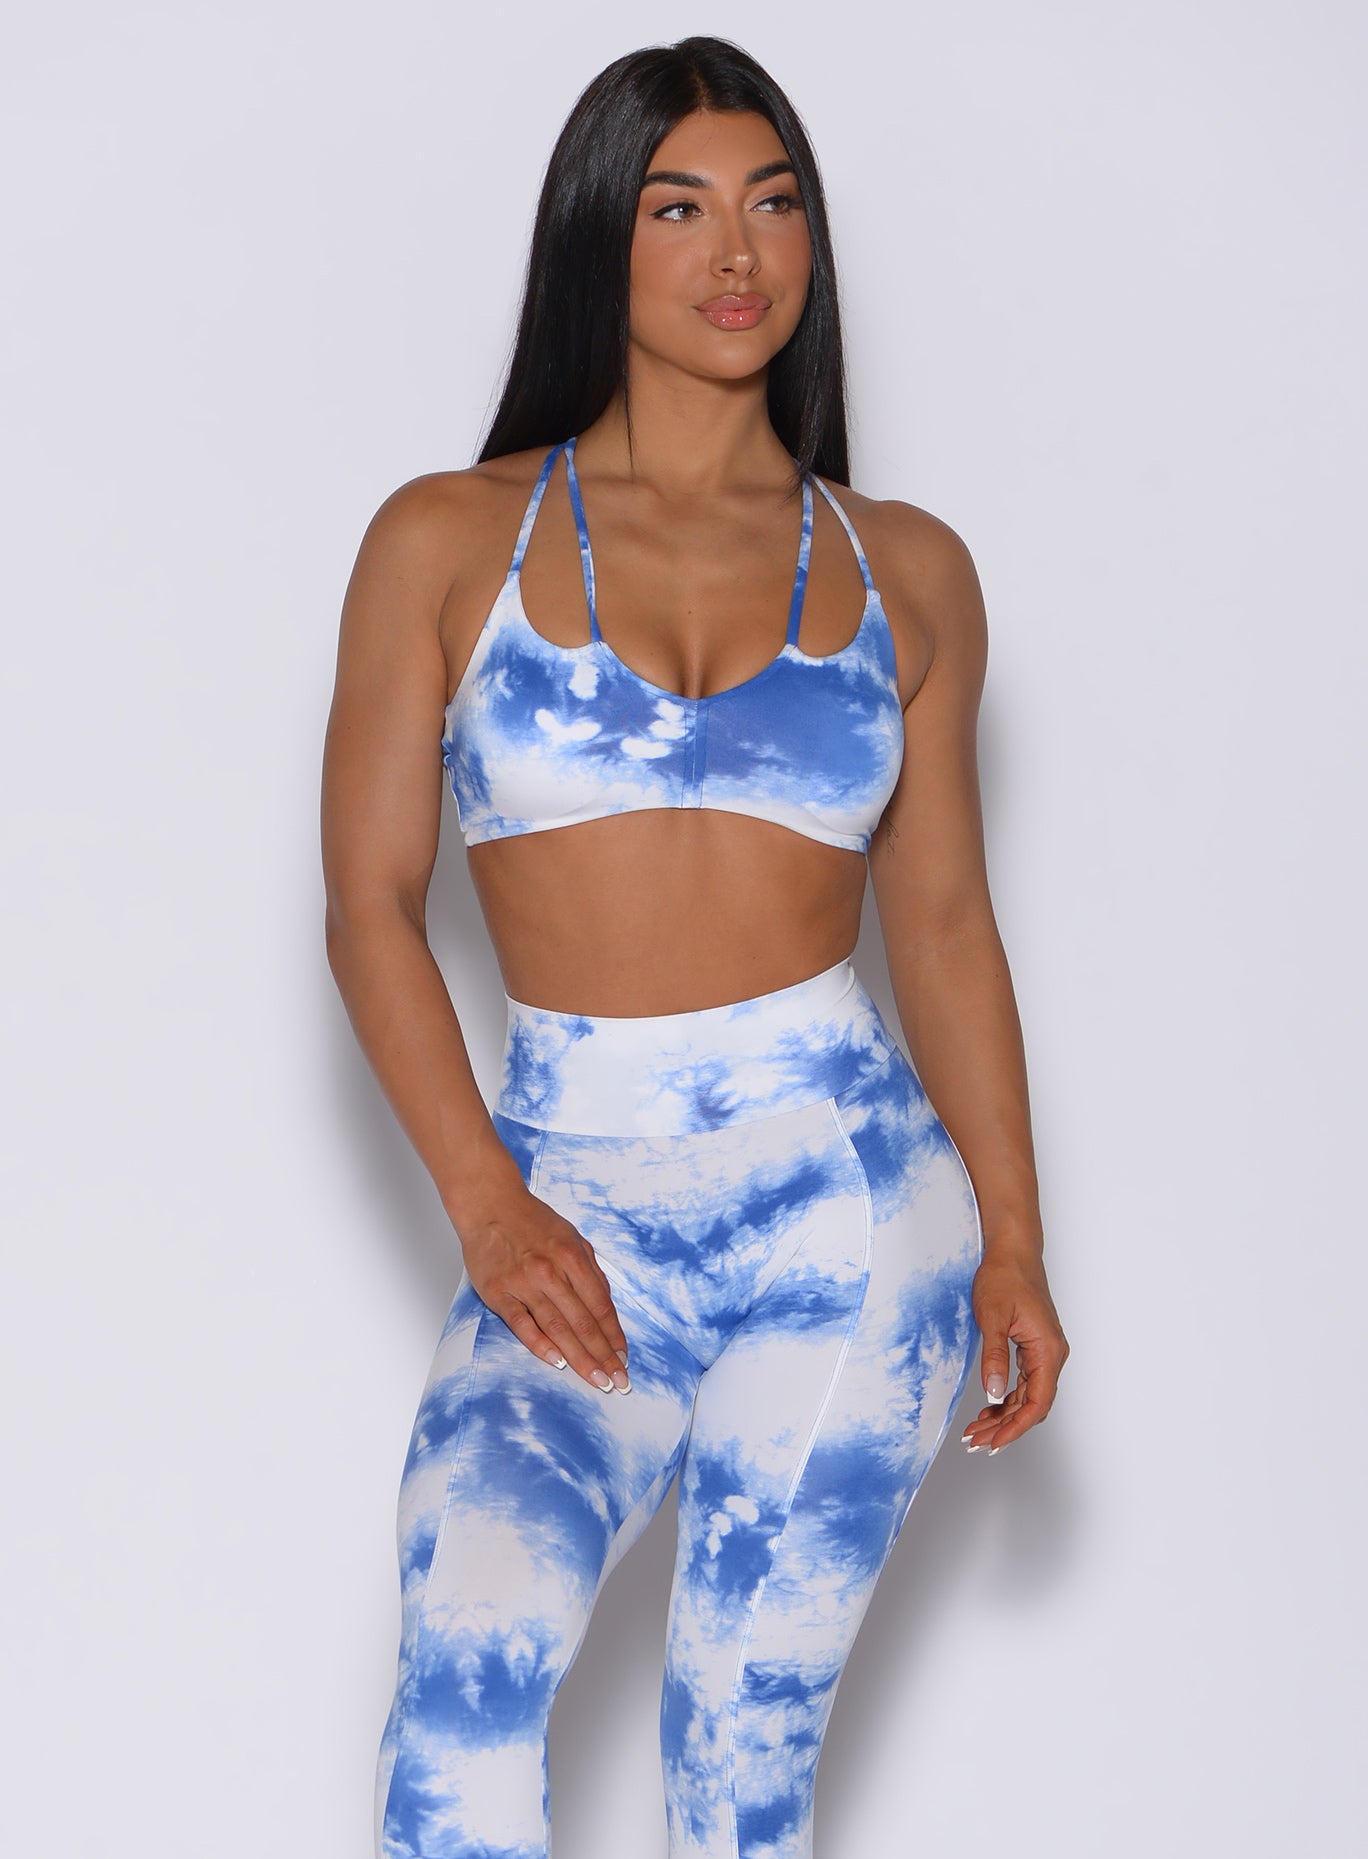 Front profile view of a model wearing our topnotch bra in tie dye white blue color and a matching tie dye leggings